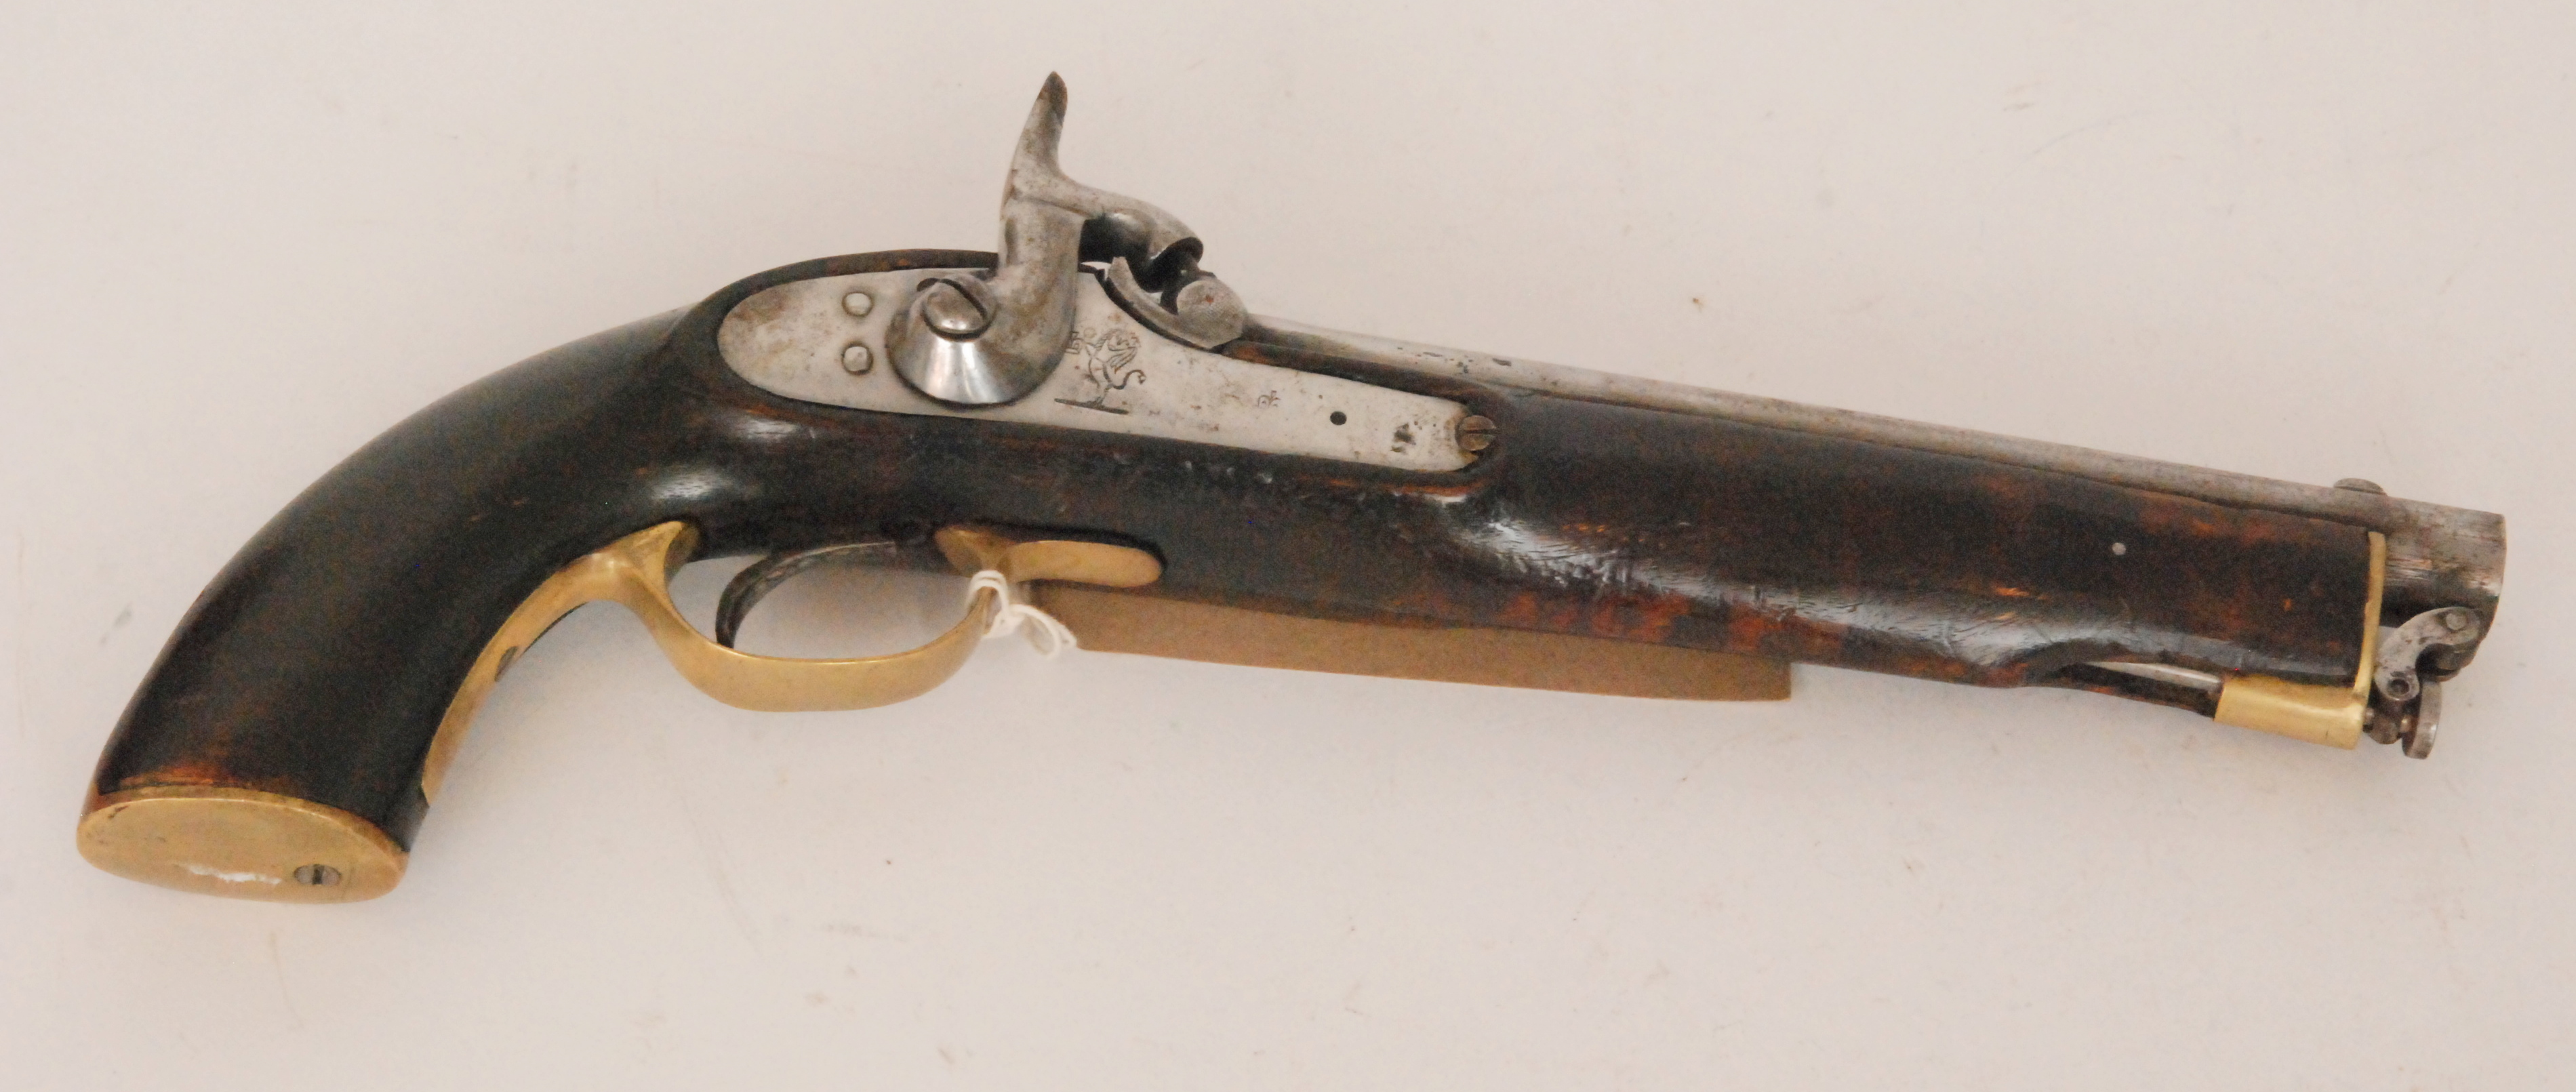 A 19th Century East India Company percussion holster pistol with ram rod brass trigger guard and